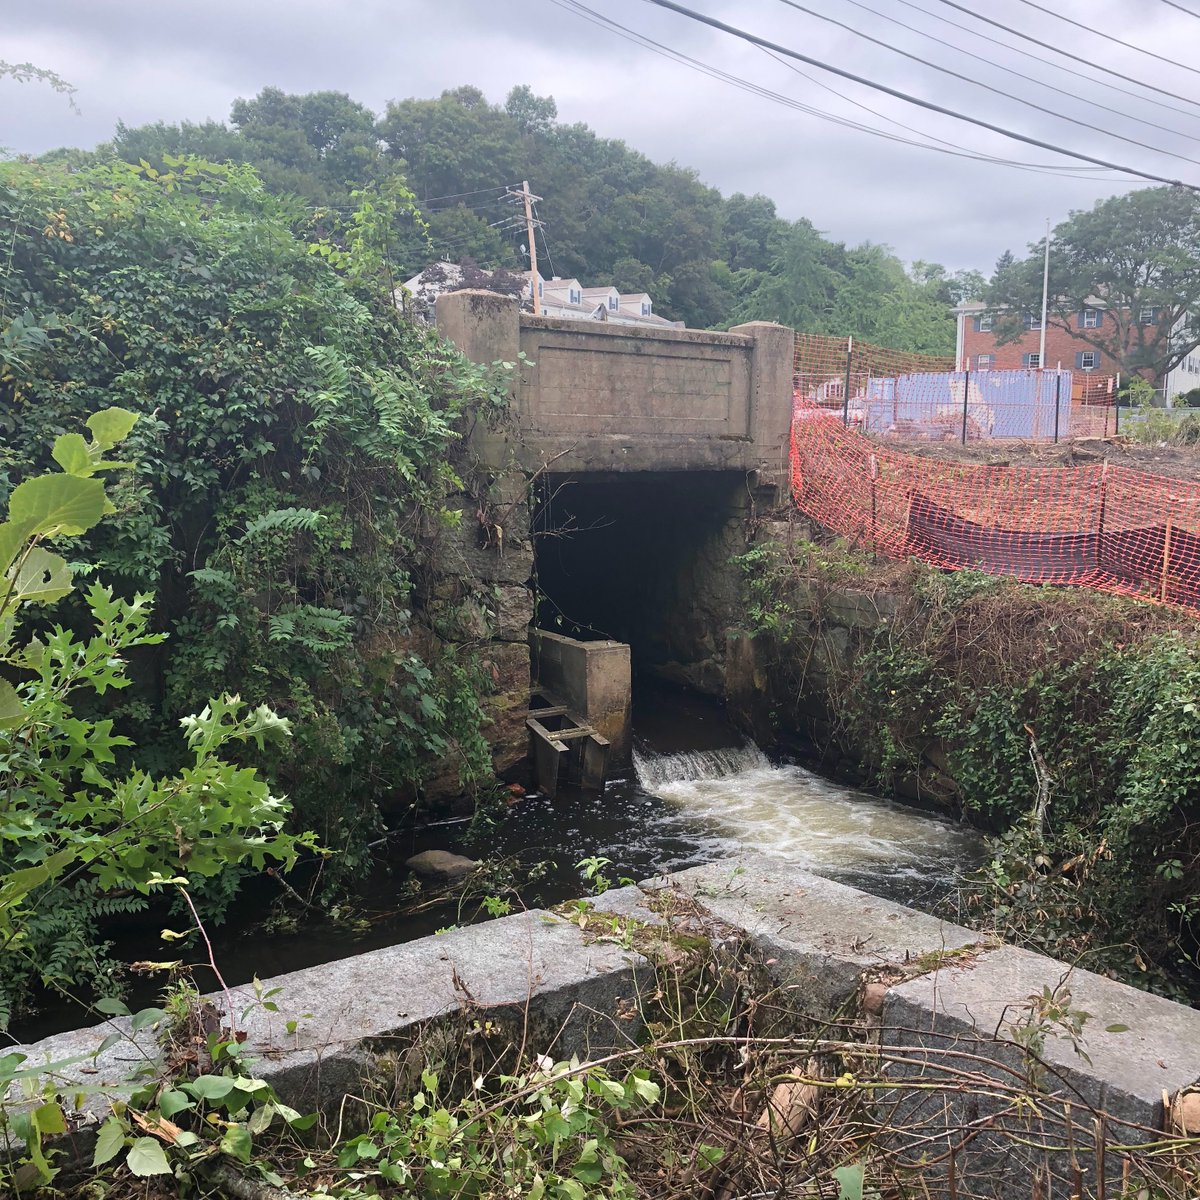 Dam removal supports #ClimateResilience. Many of the 3,000+ dams in Massachusetts are in disrepair & few serve their original purpose. For example, the Holmes Dam in Plymouth was a 200-year-old, 16-ft tall structure that ran along Town Brook & was removed in 2019. #MAClimateWeek